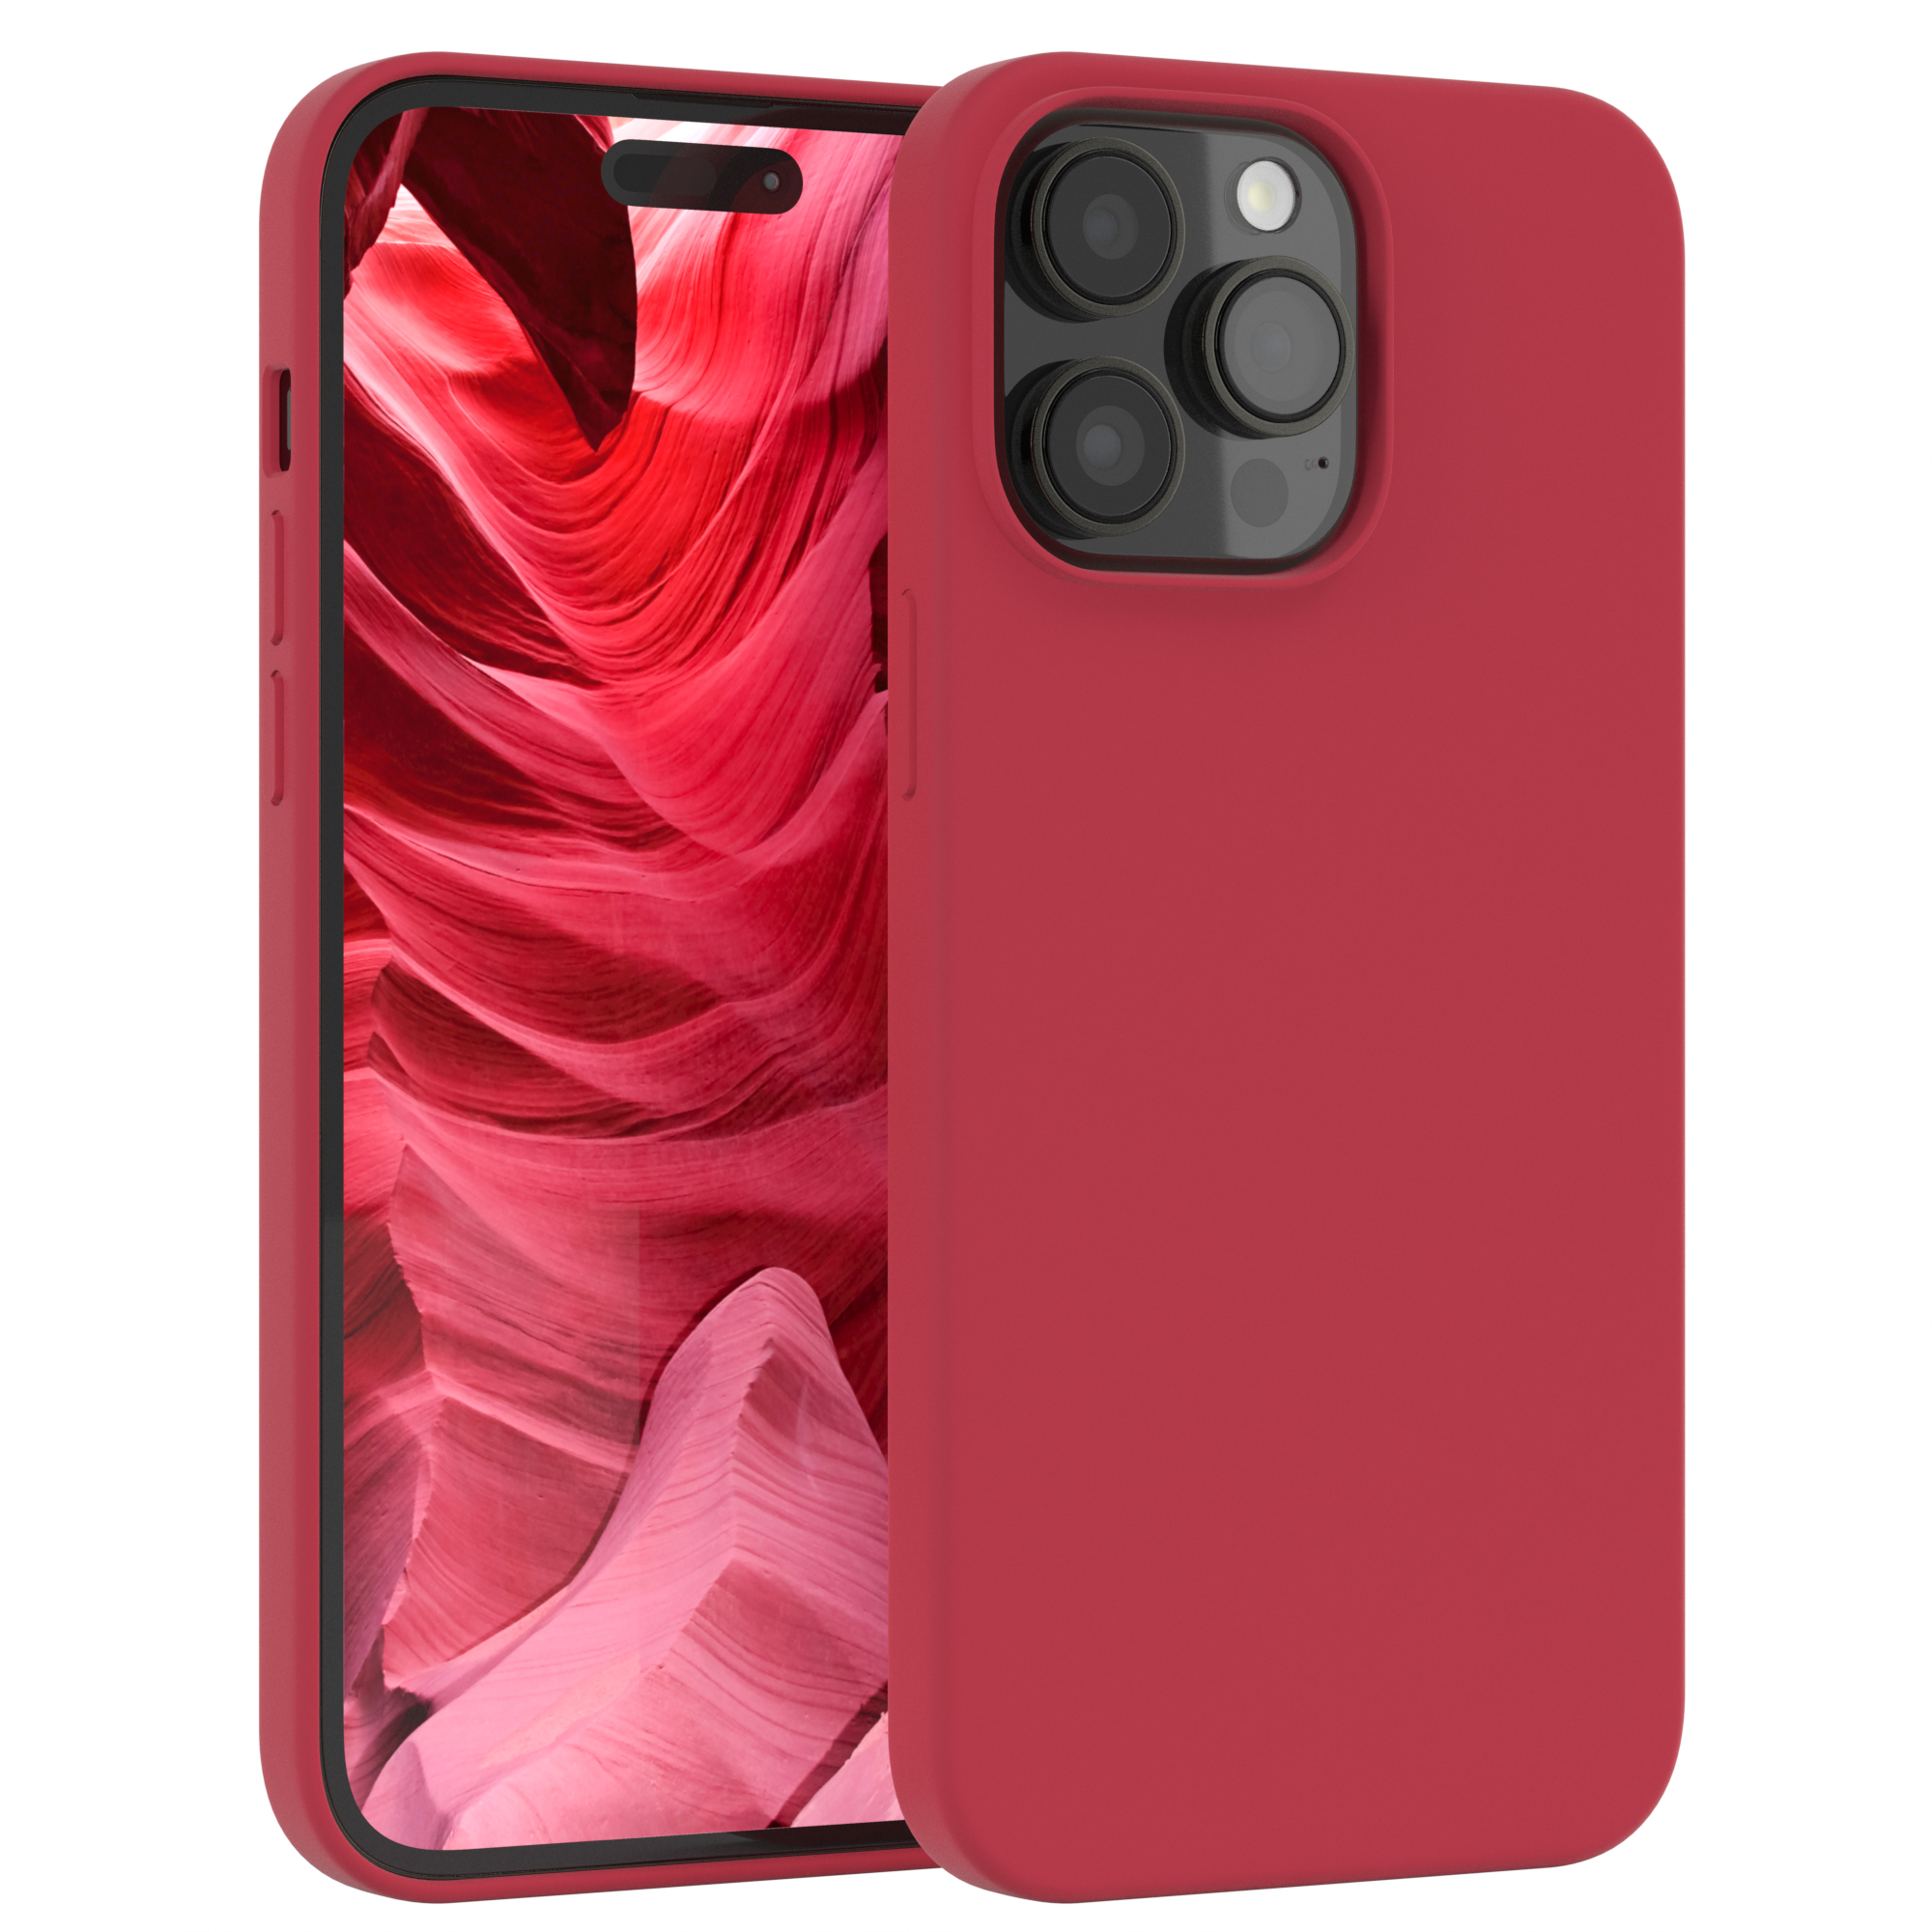 EAZY CASE Premium Silikon Handycase, Max, iPhone Backcover, 14 Apple, Beere Pro / Rot